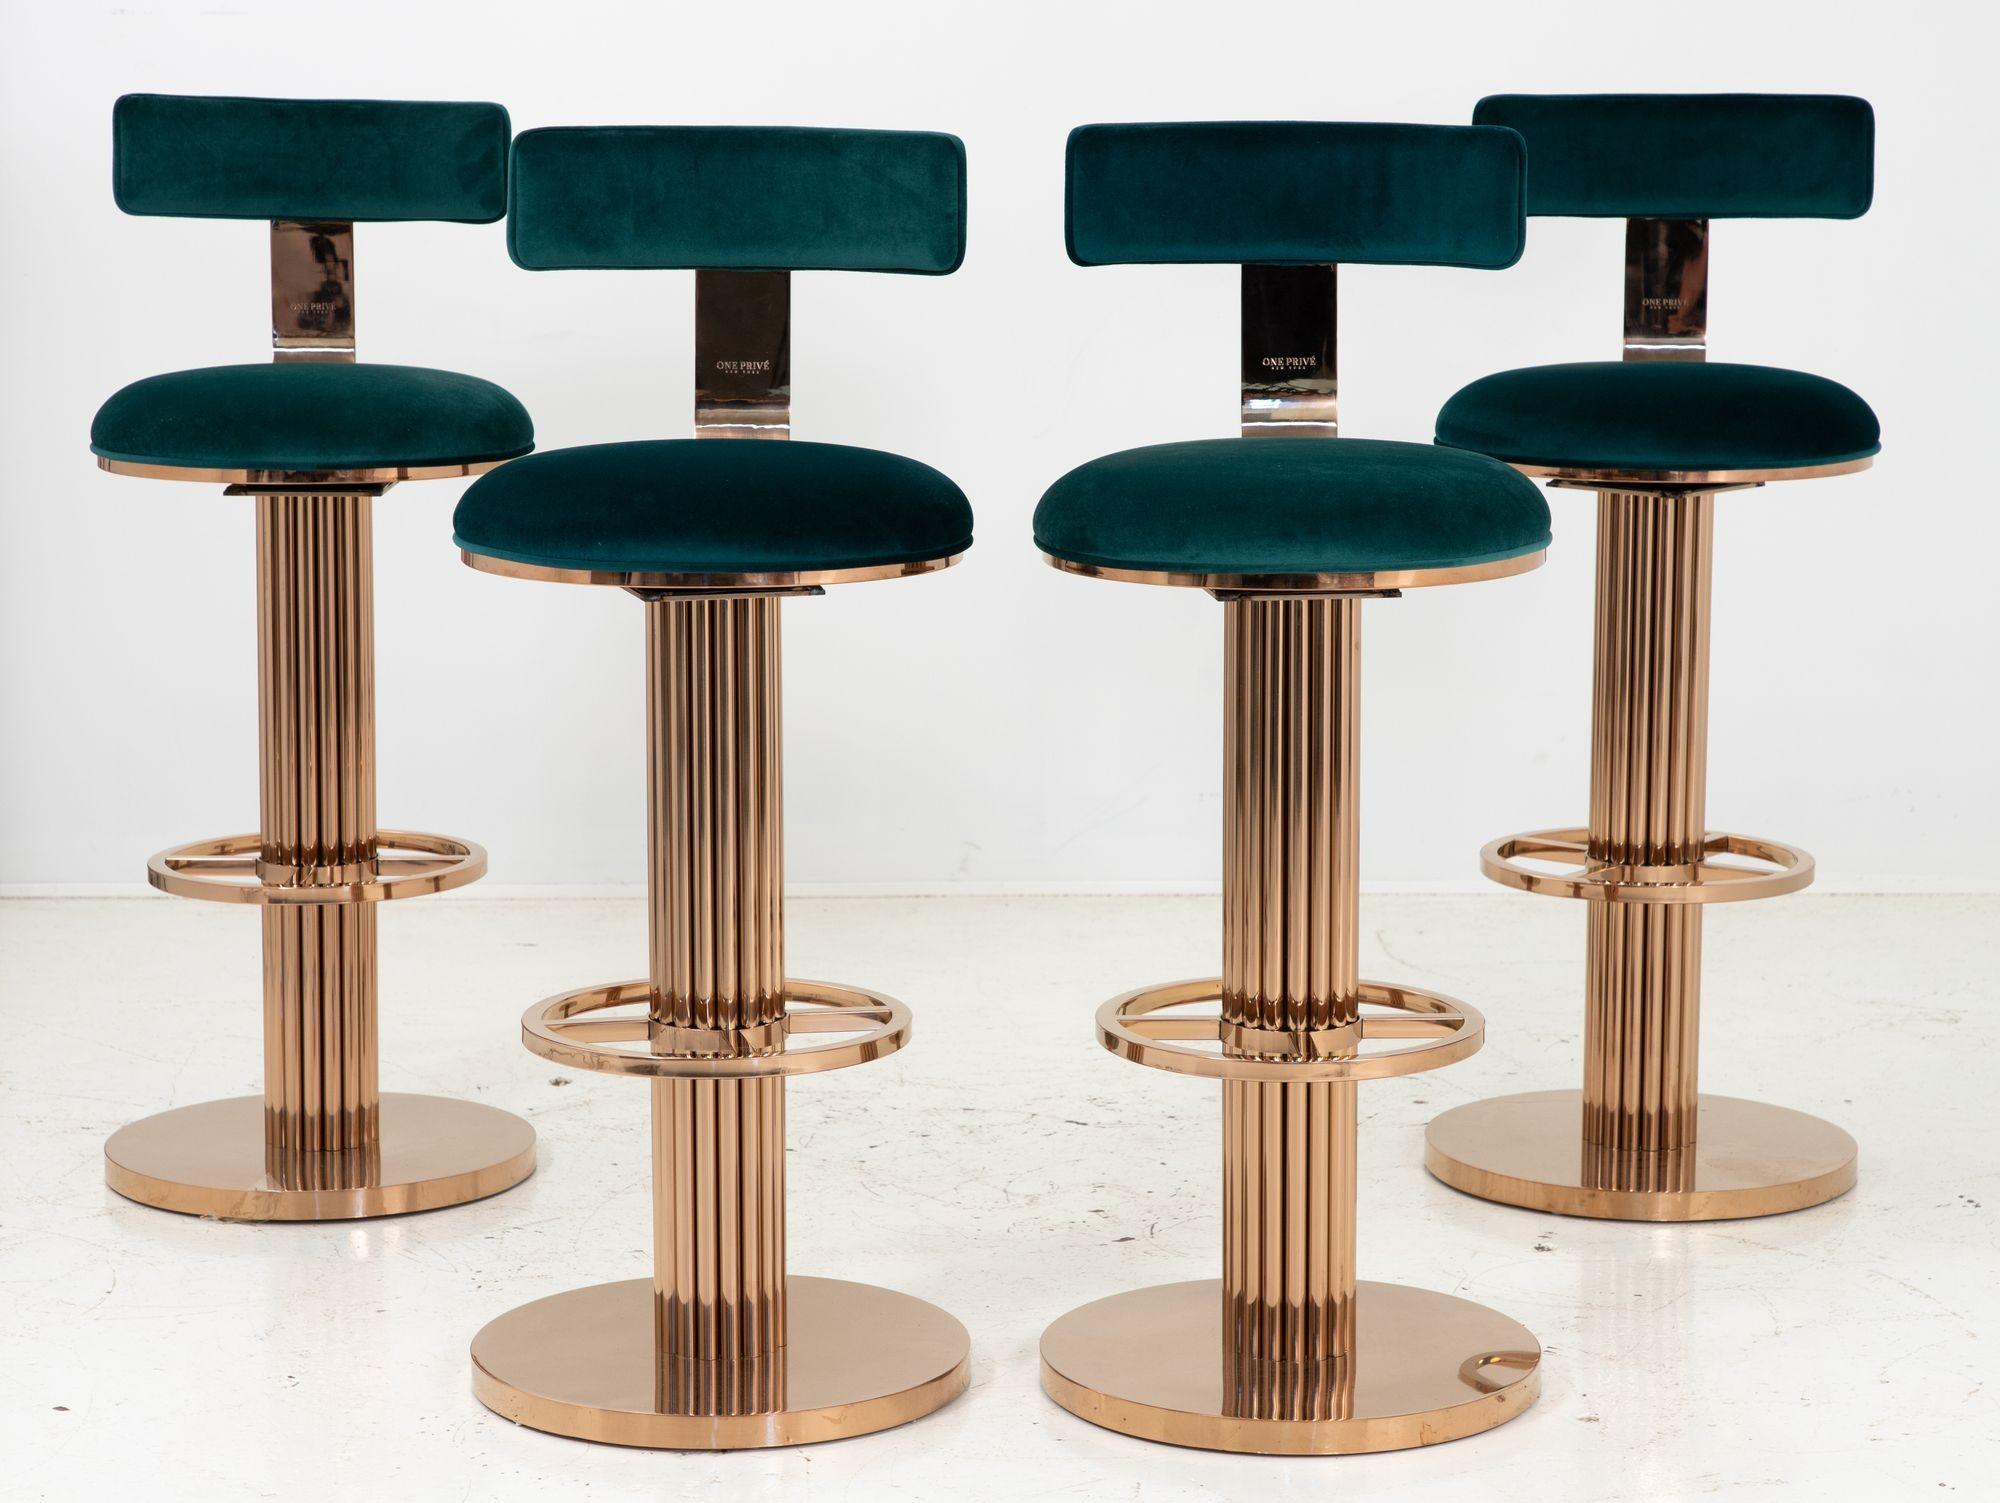 A set of four barstools with a subtle rose gold finish and emerald velvet upholstery. This set is a reproduction of the Art Deco style Design For Leisure stools that were produced in the 1980s. Each base has a fluted design with a foot rest.